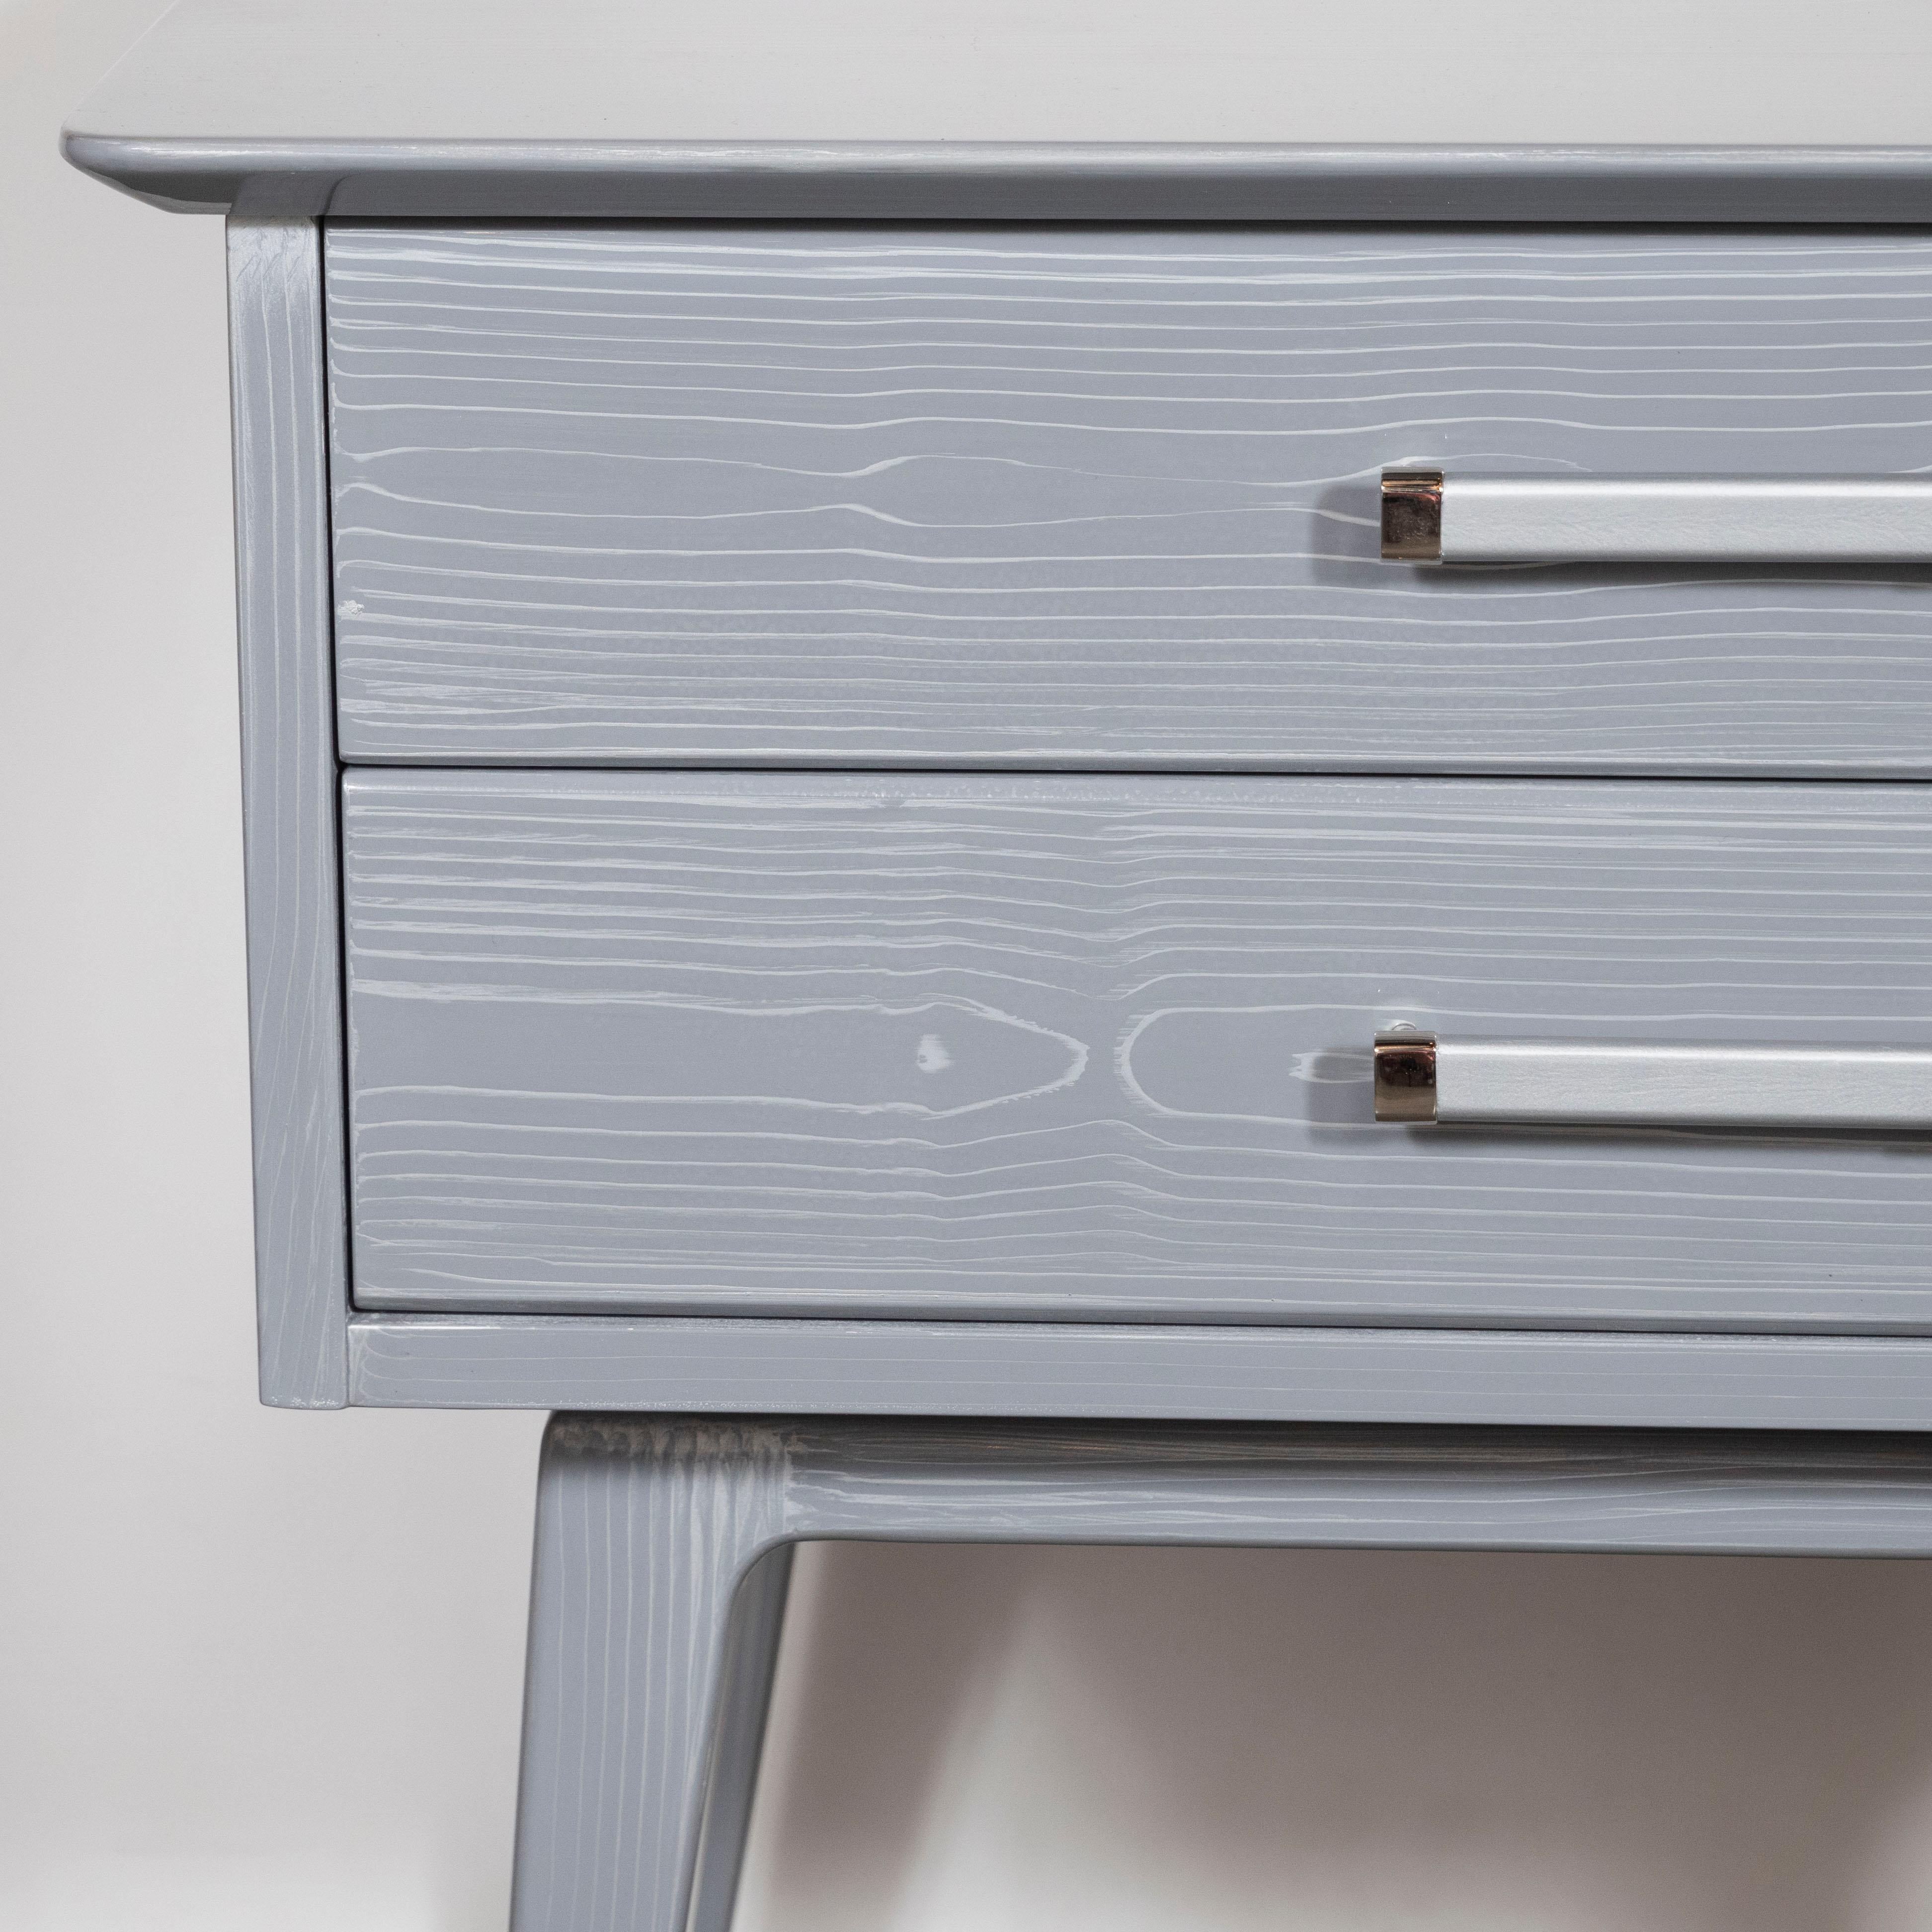 American Pair of Midcentury Cerused Nightstands with Chromed Fittings by John Stuart Inc.